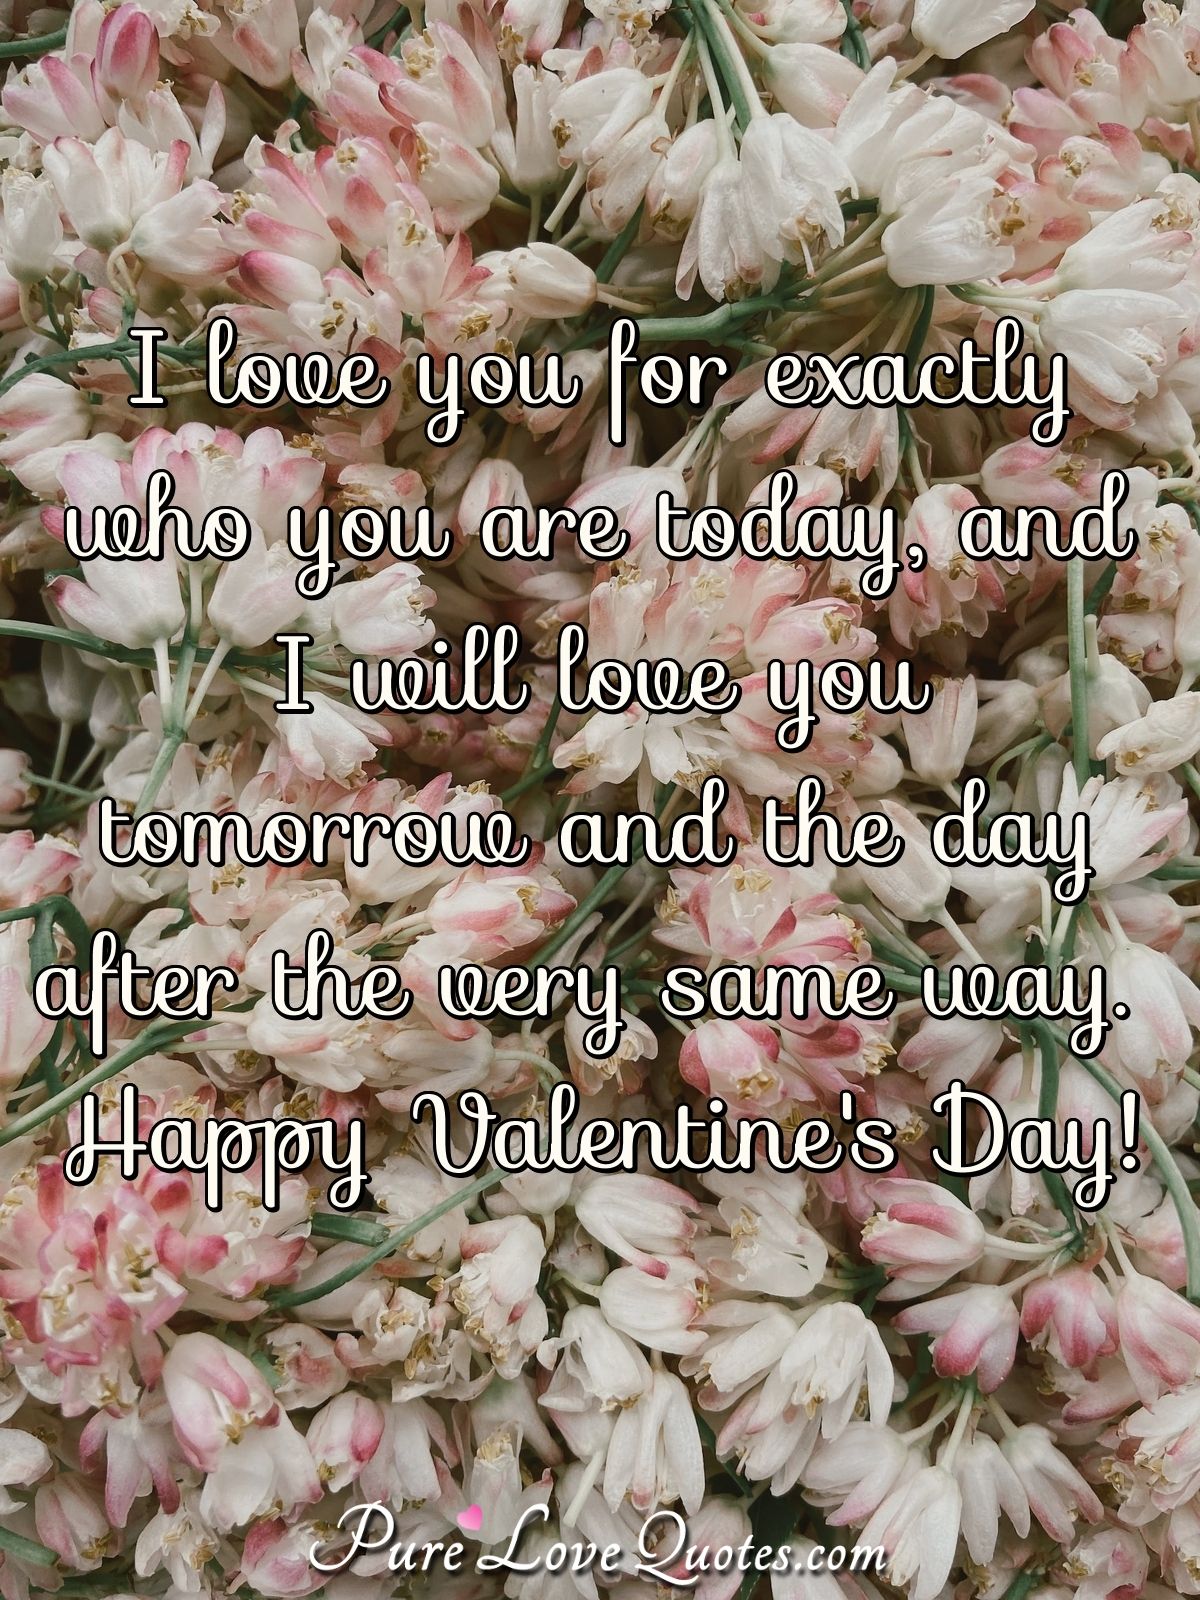 I love you for exactly who you are today, and I will love you tomorrow and the day after the very same way. Happy Valentine's Day! - Anonymous